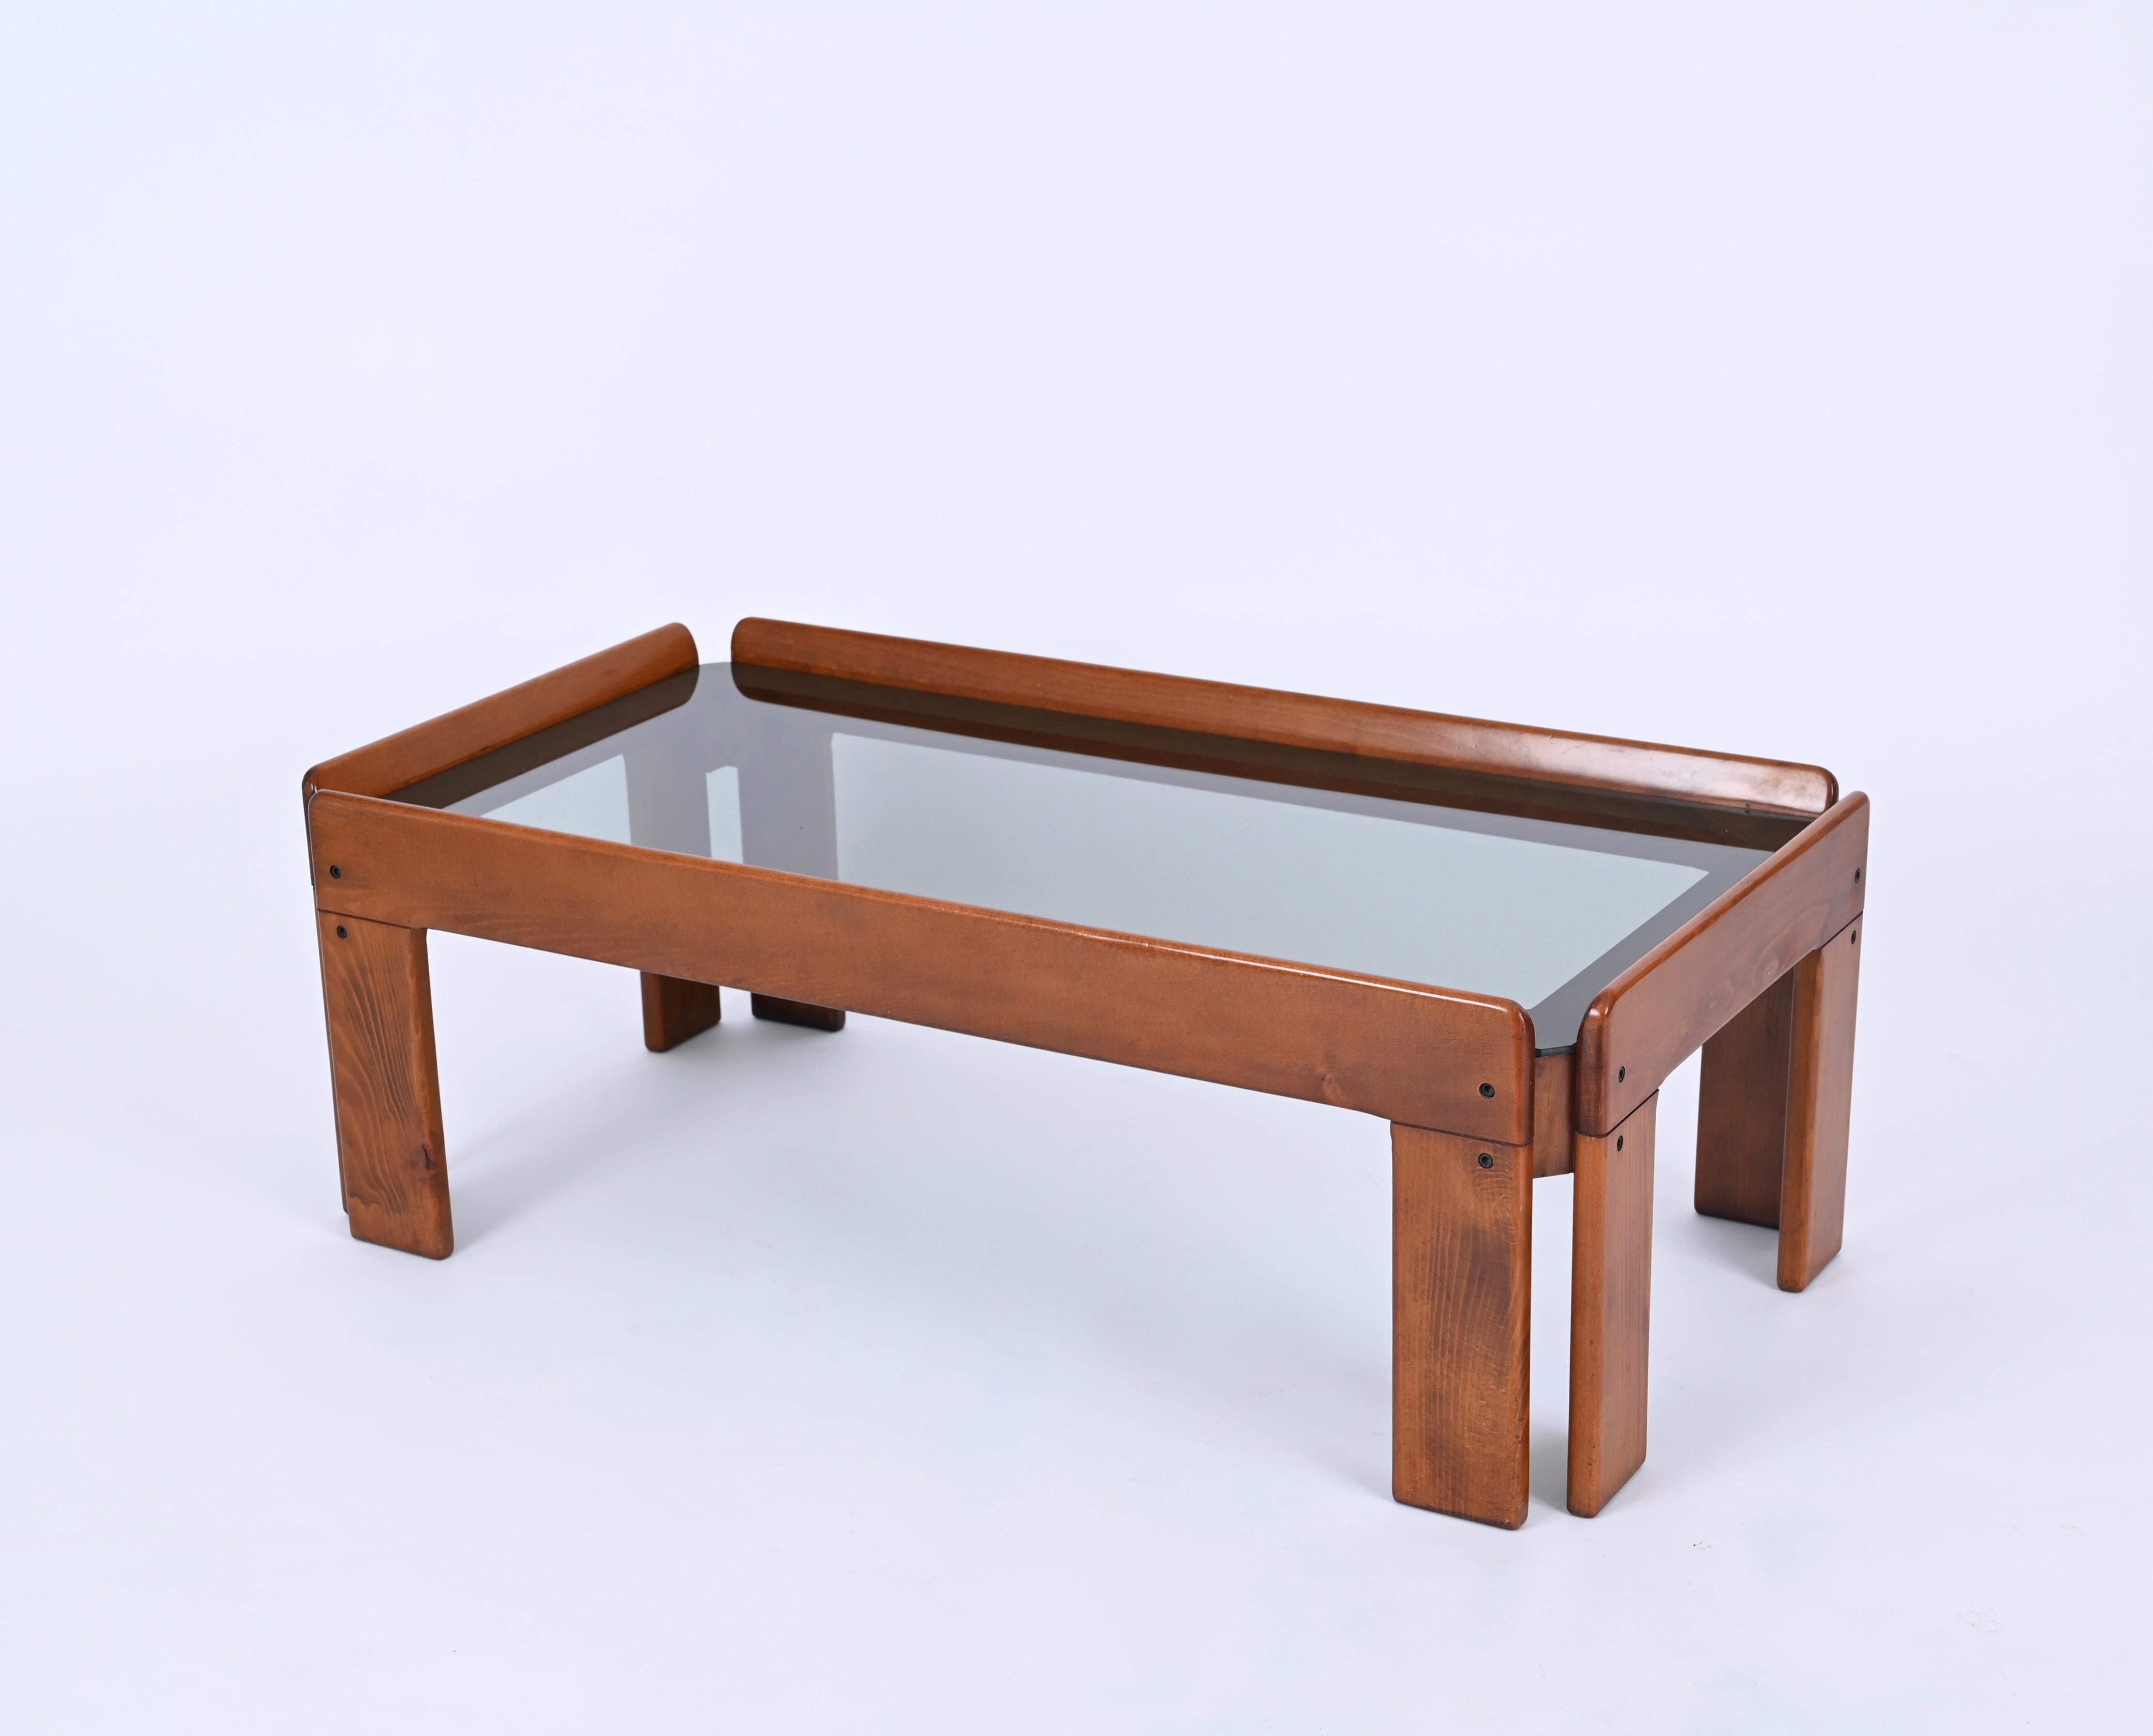 Afra & Tobia Scarpa Mid-Century Walnut Coffee Table for Cassina, Italy 1960s For Sale 4